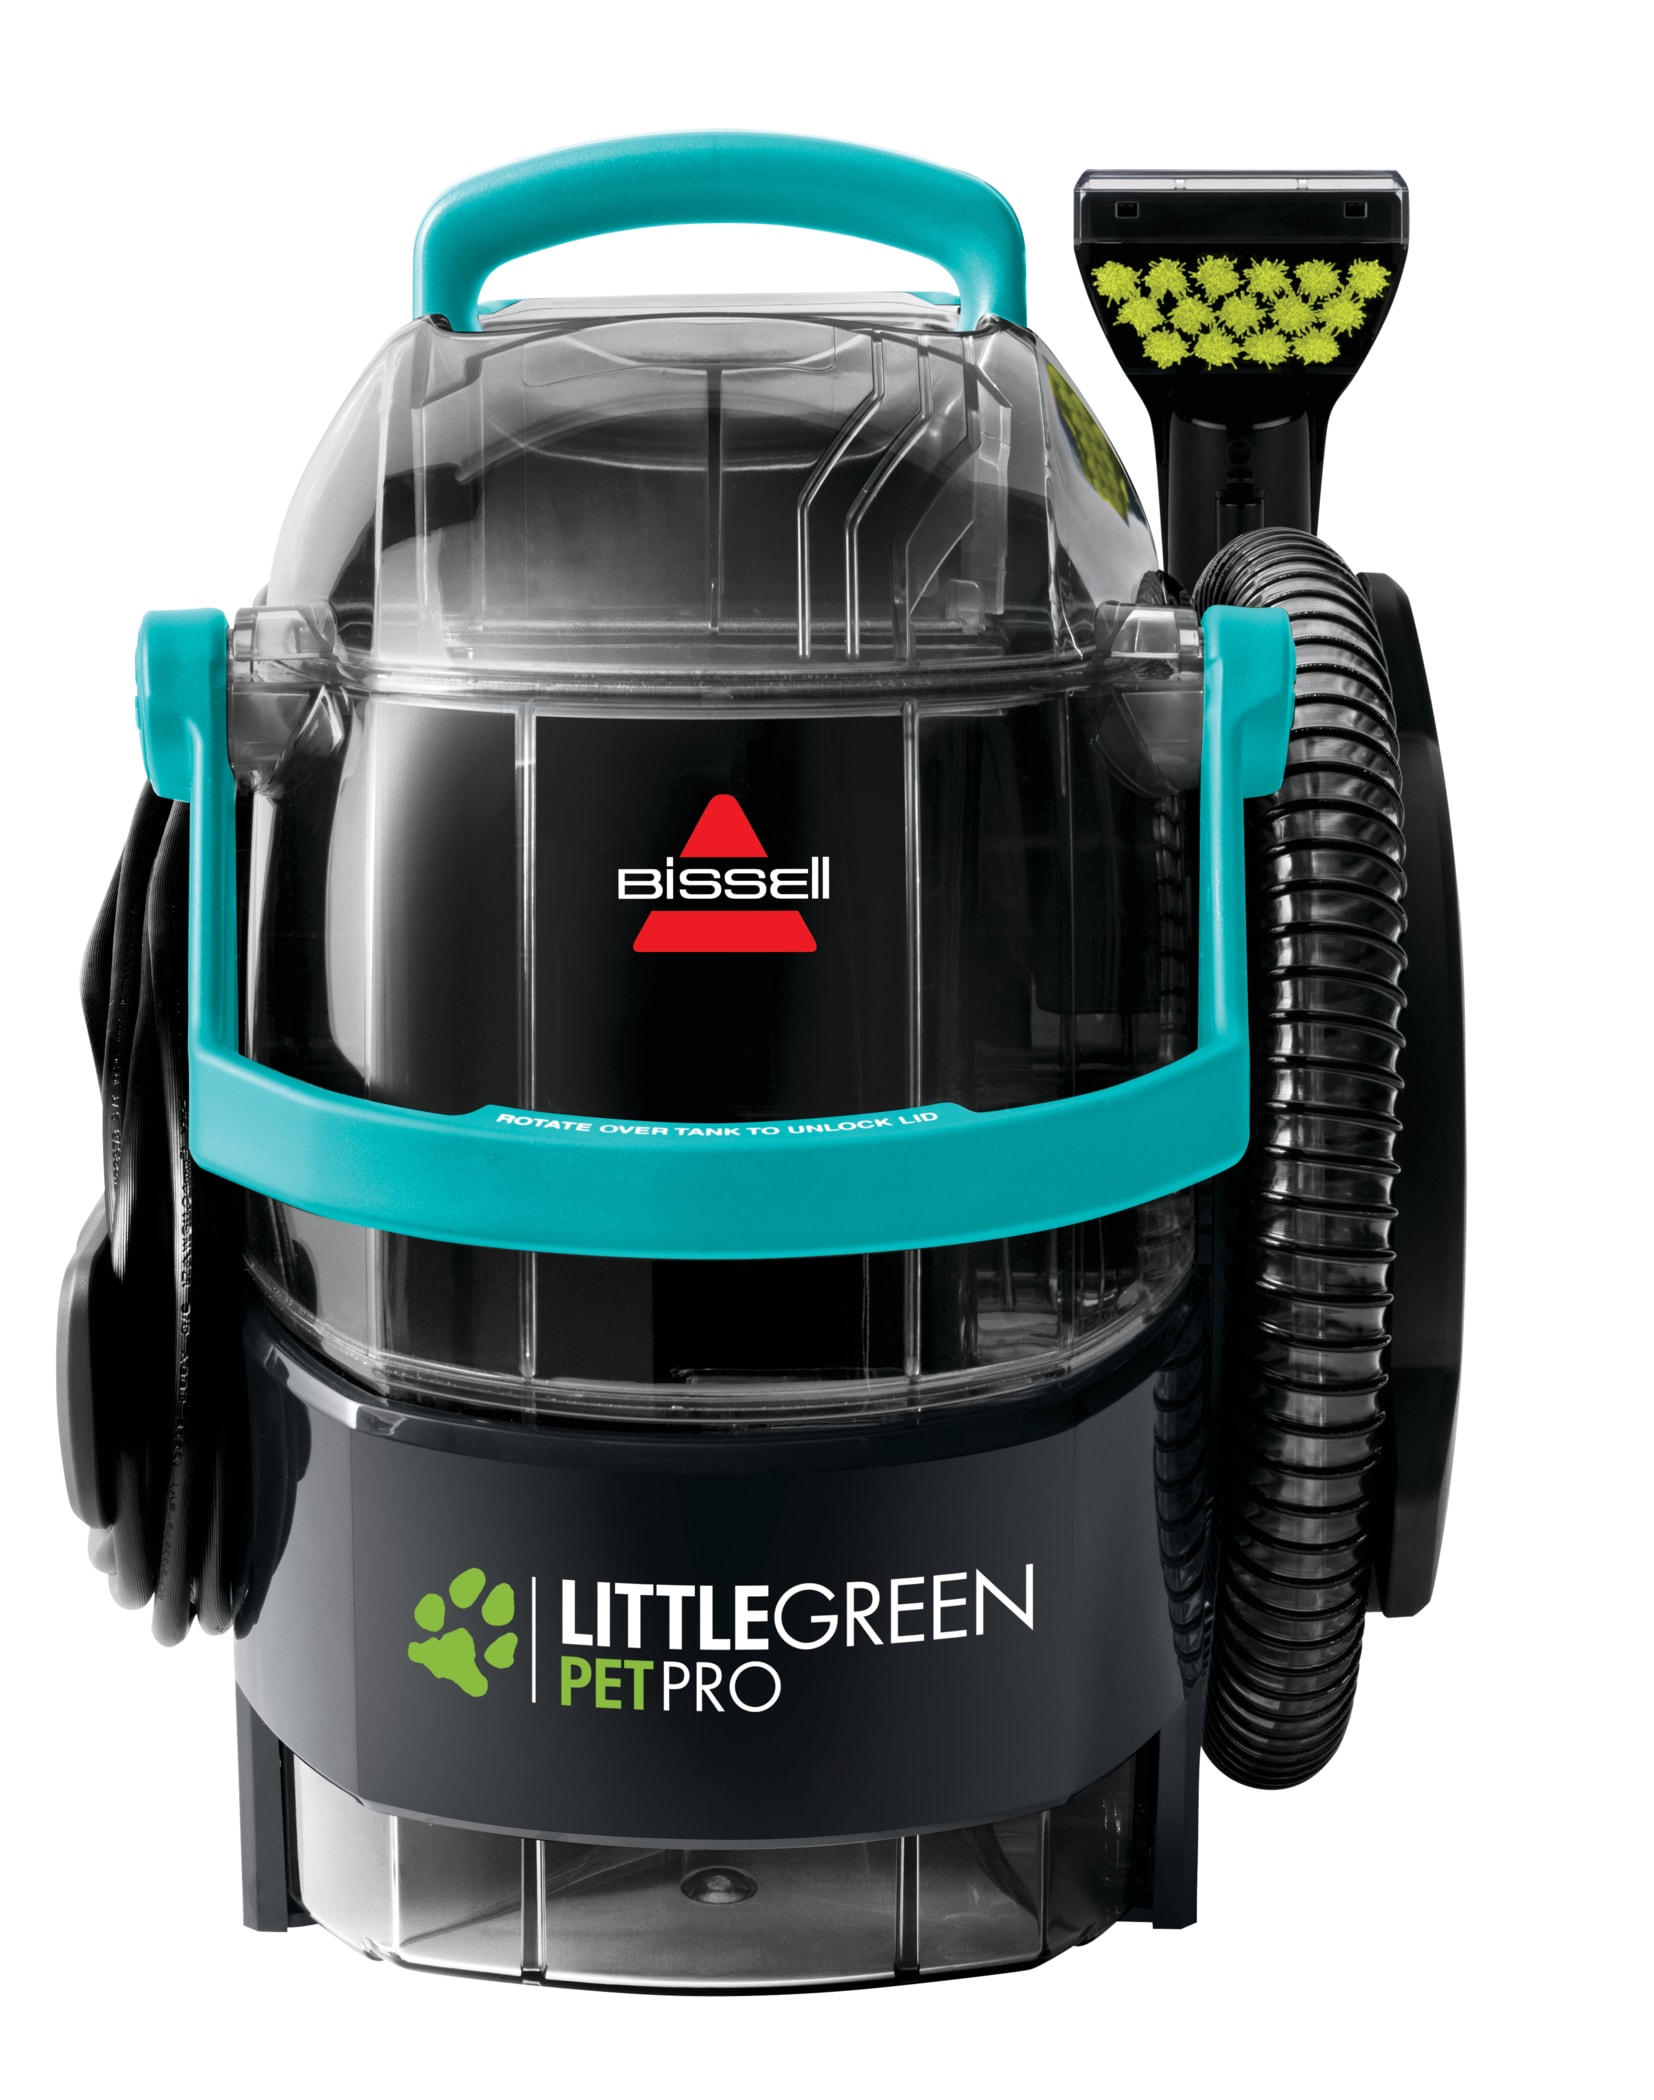 Bissell little Green Compact Multipurpose Carpet Cleaner - Green